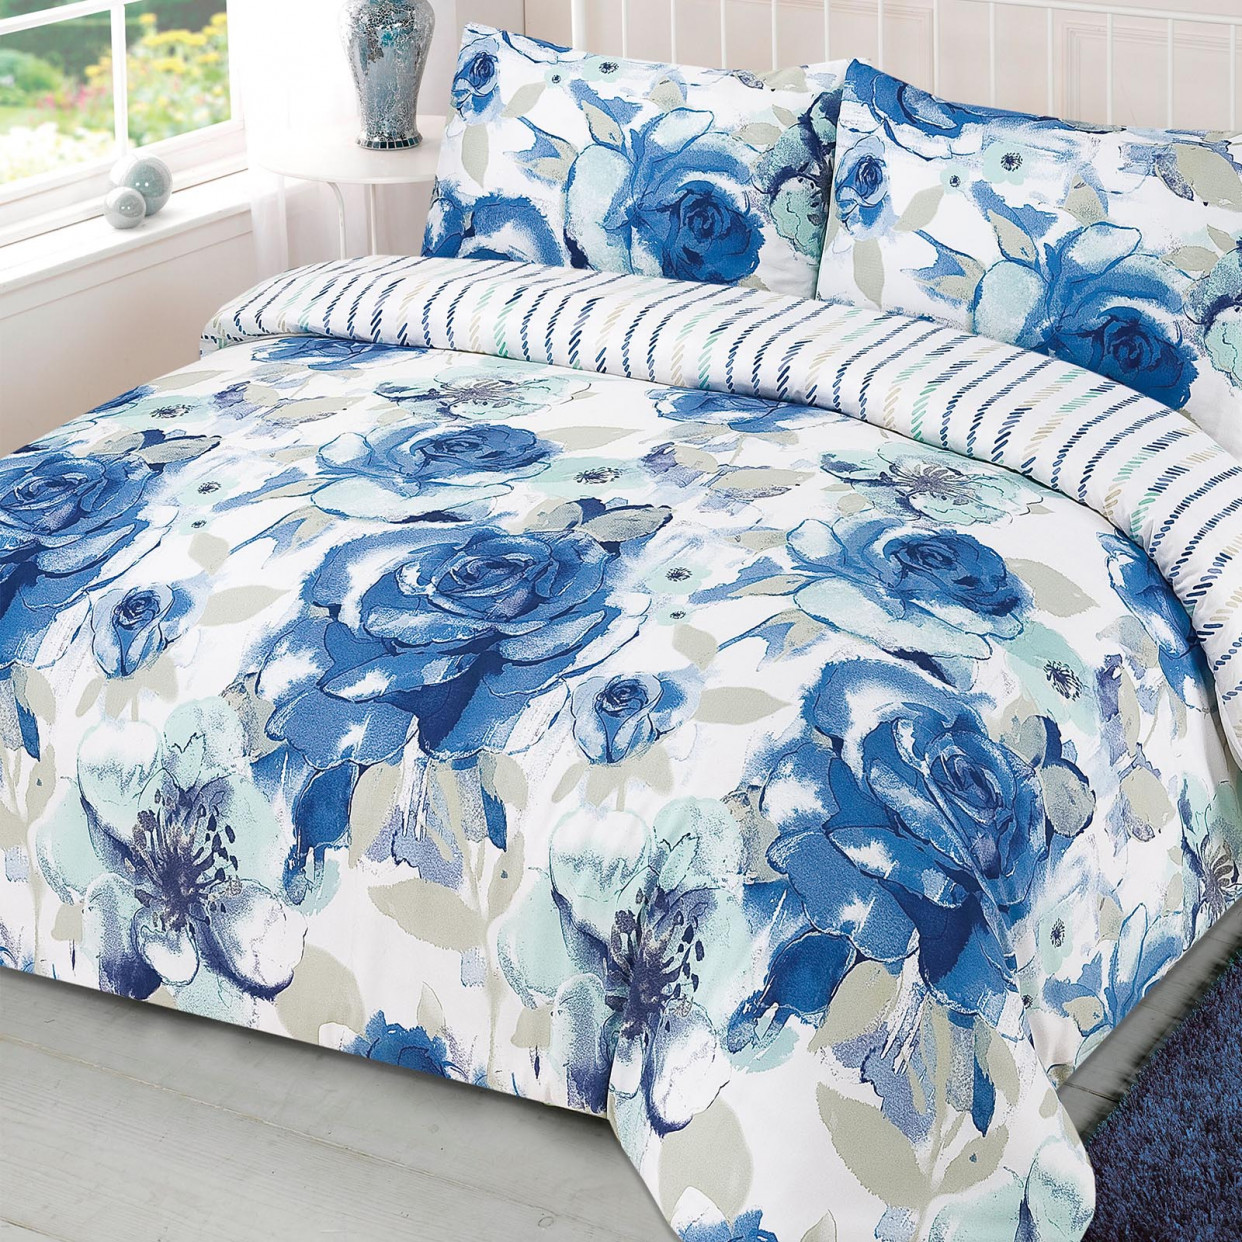 Floral Reversible King Size Cover With Pillowcase Set Blue/White>